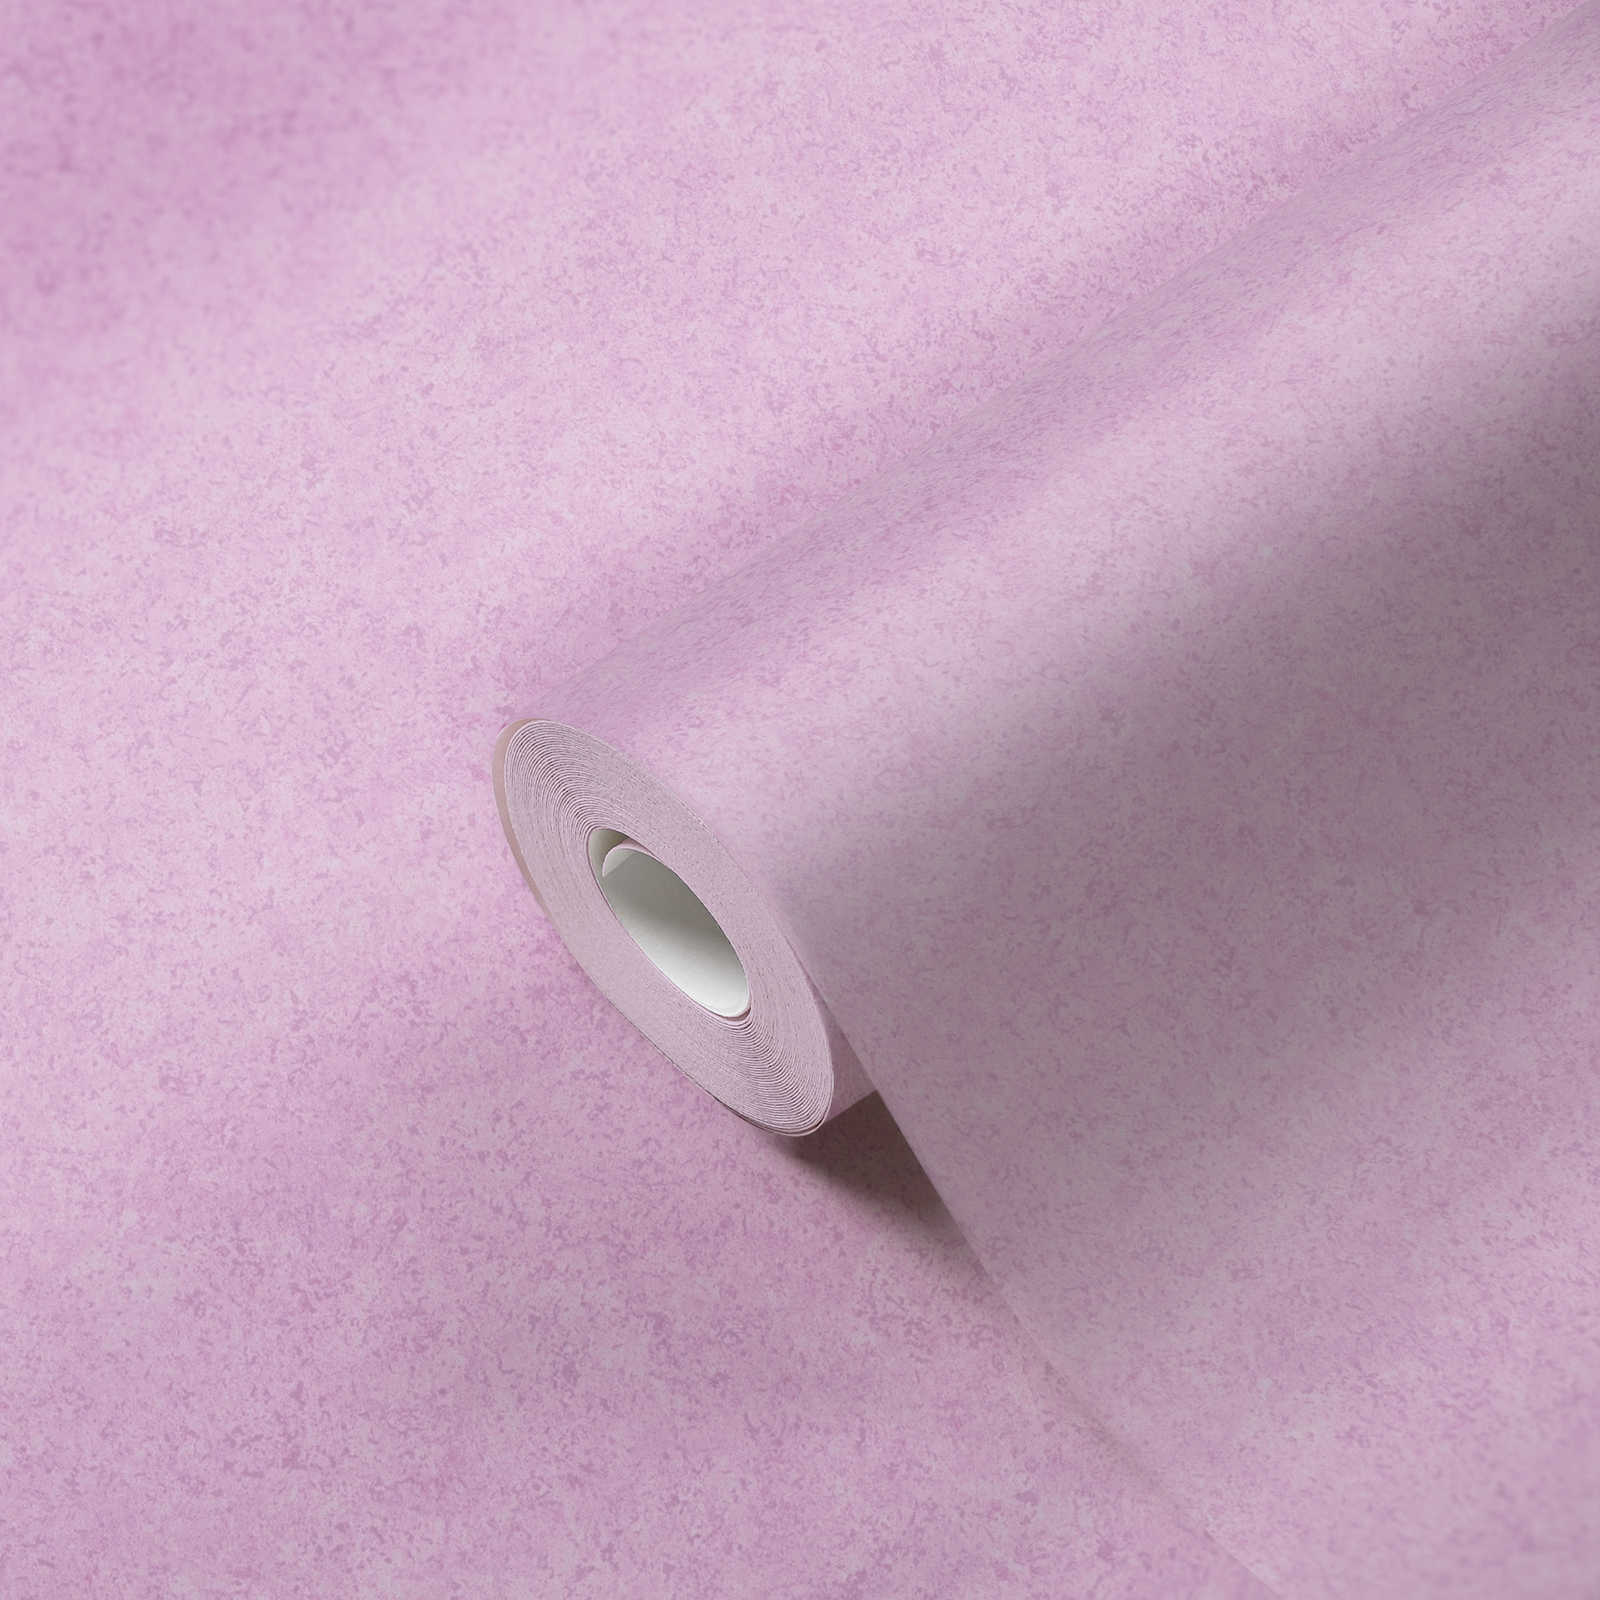             Non-woven wallpaper pink plaster look with matte pattern - pink
        